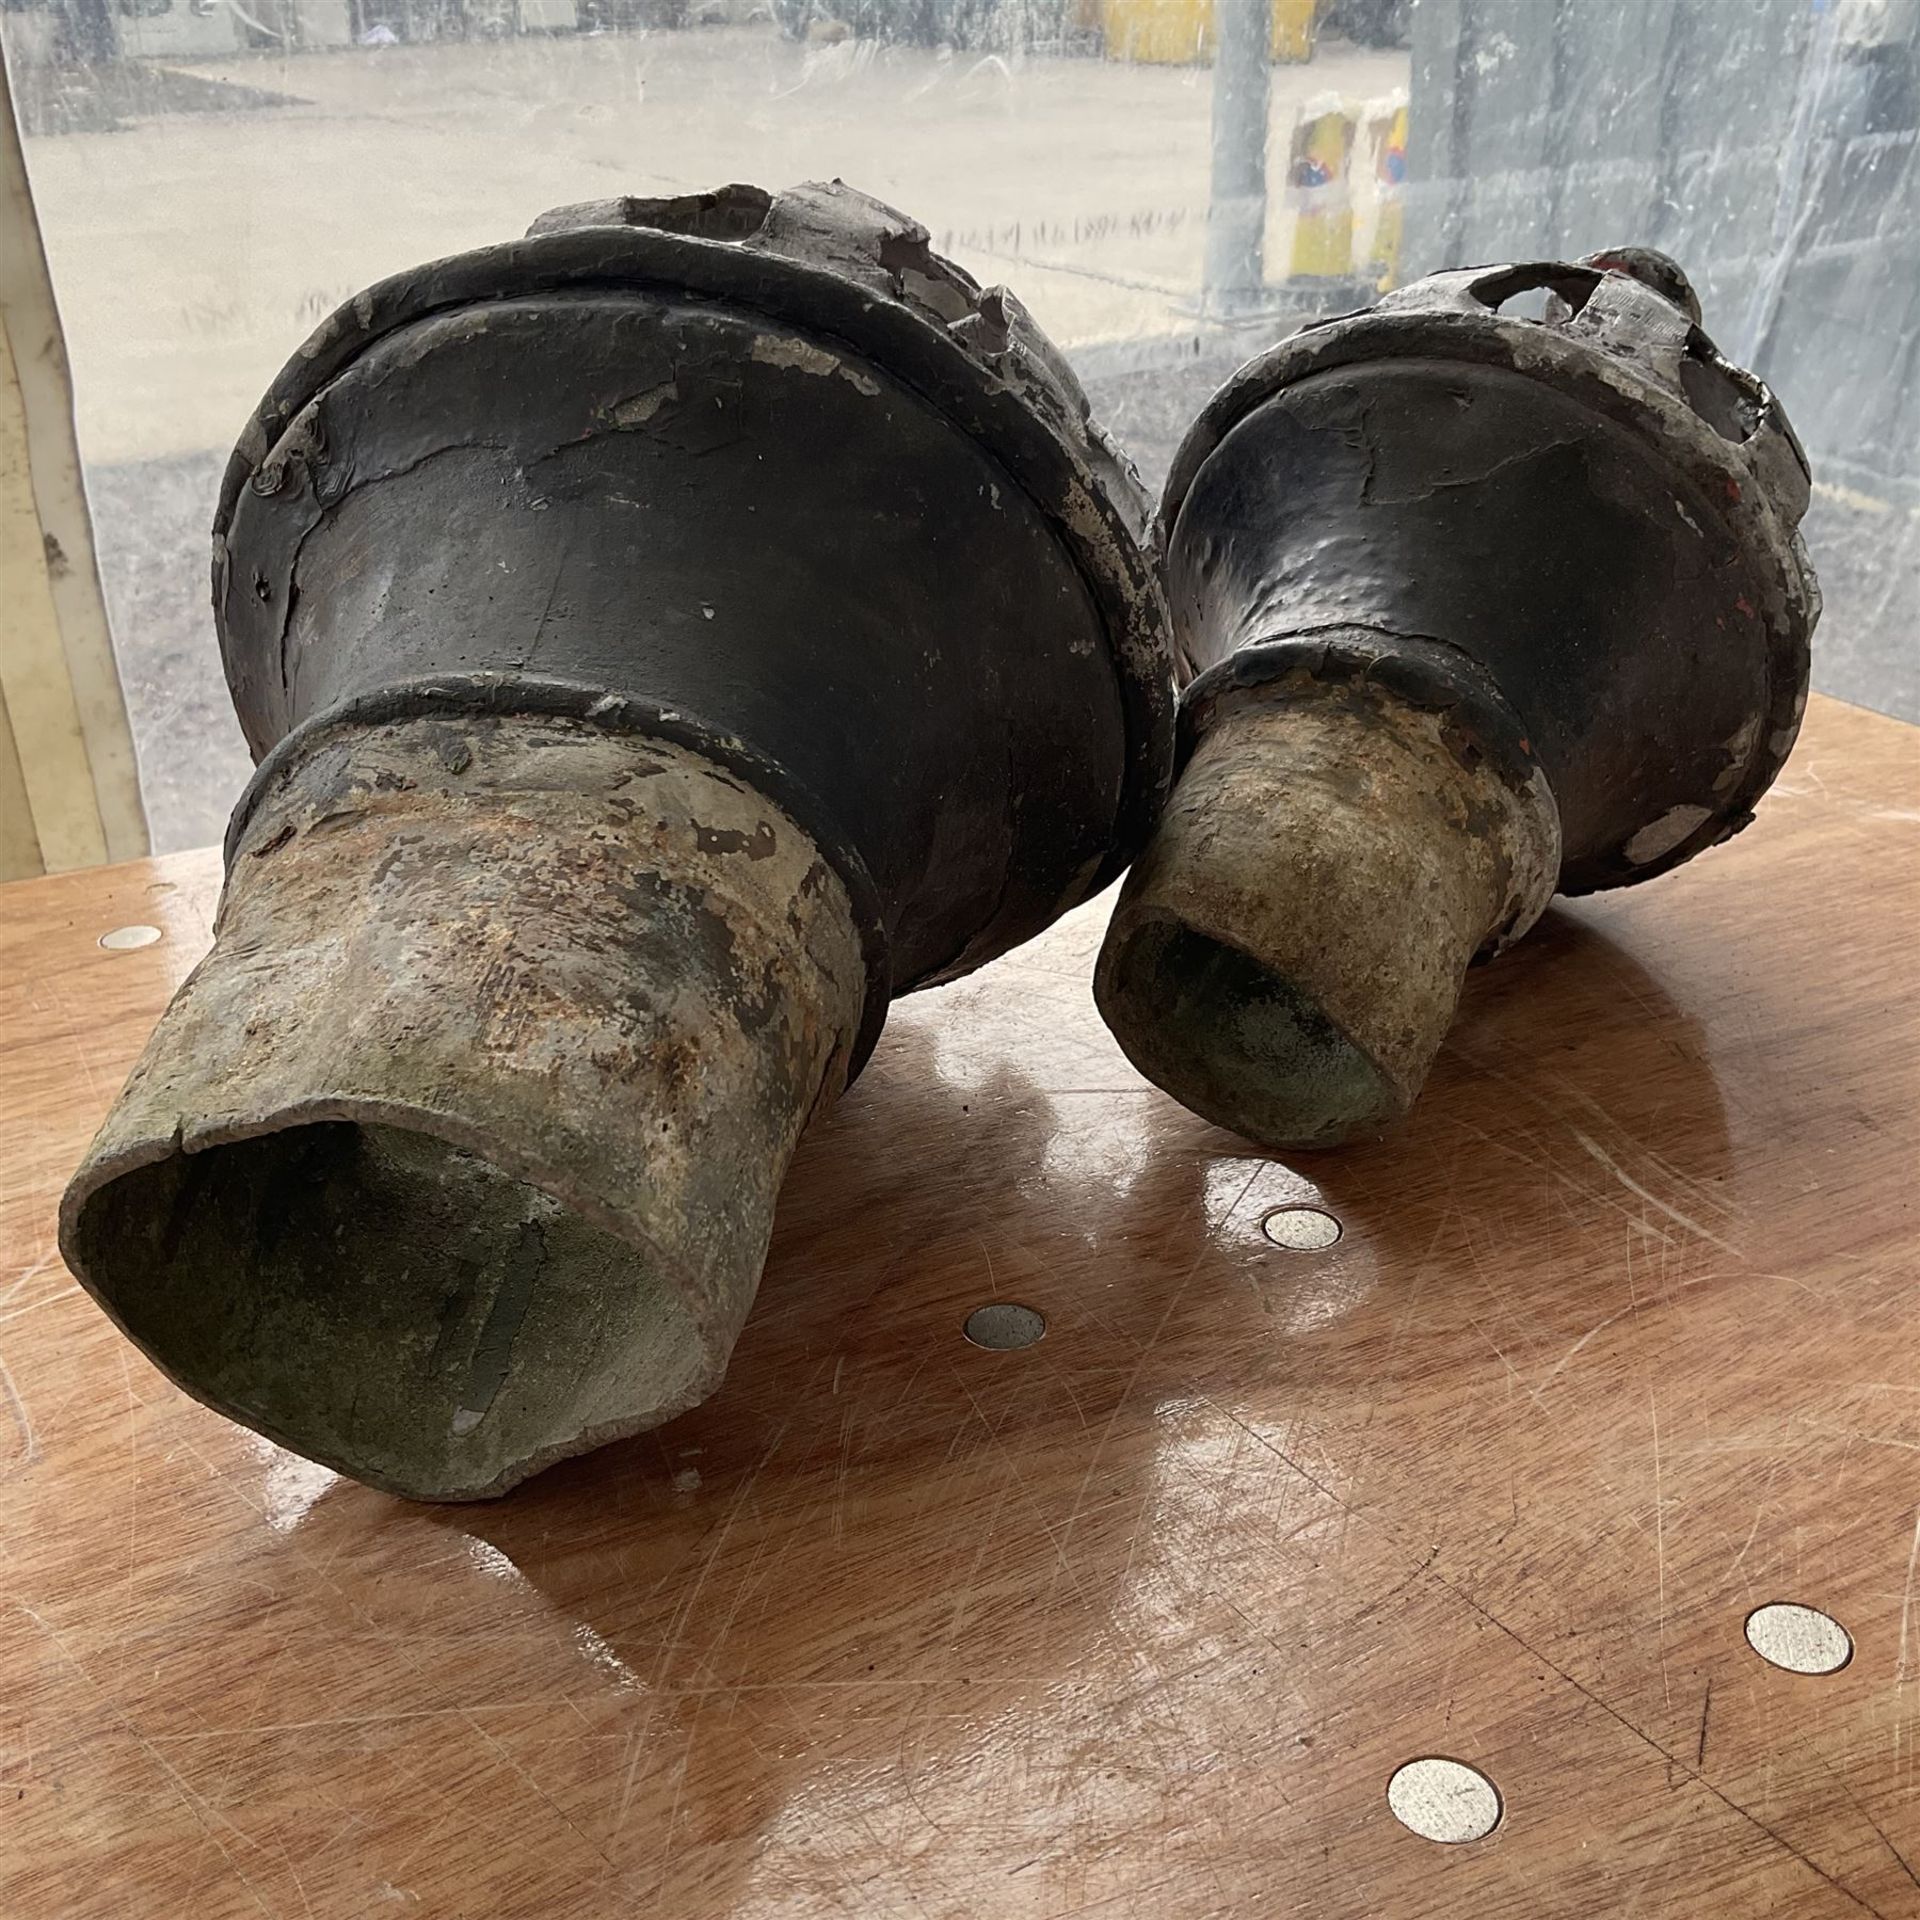 Antique lead soil pipe finials - Image 2 of 3